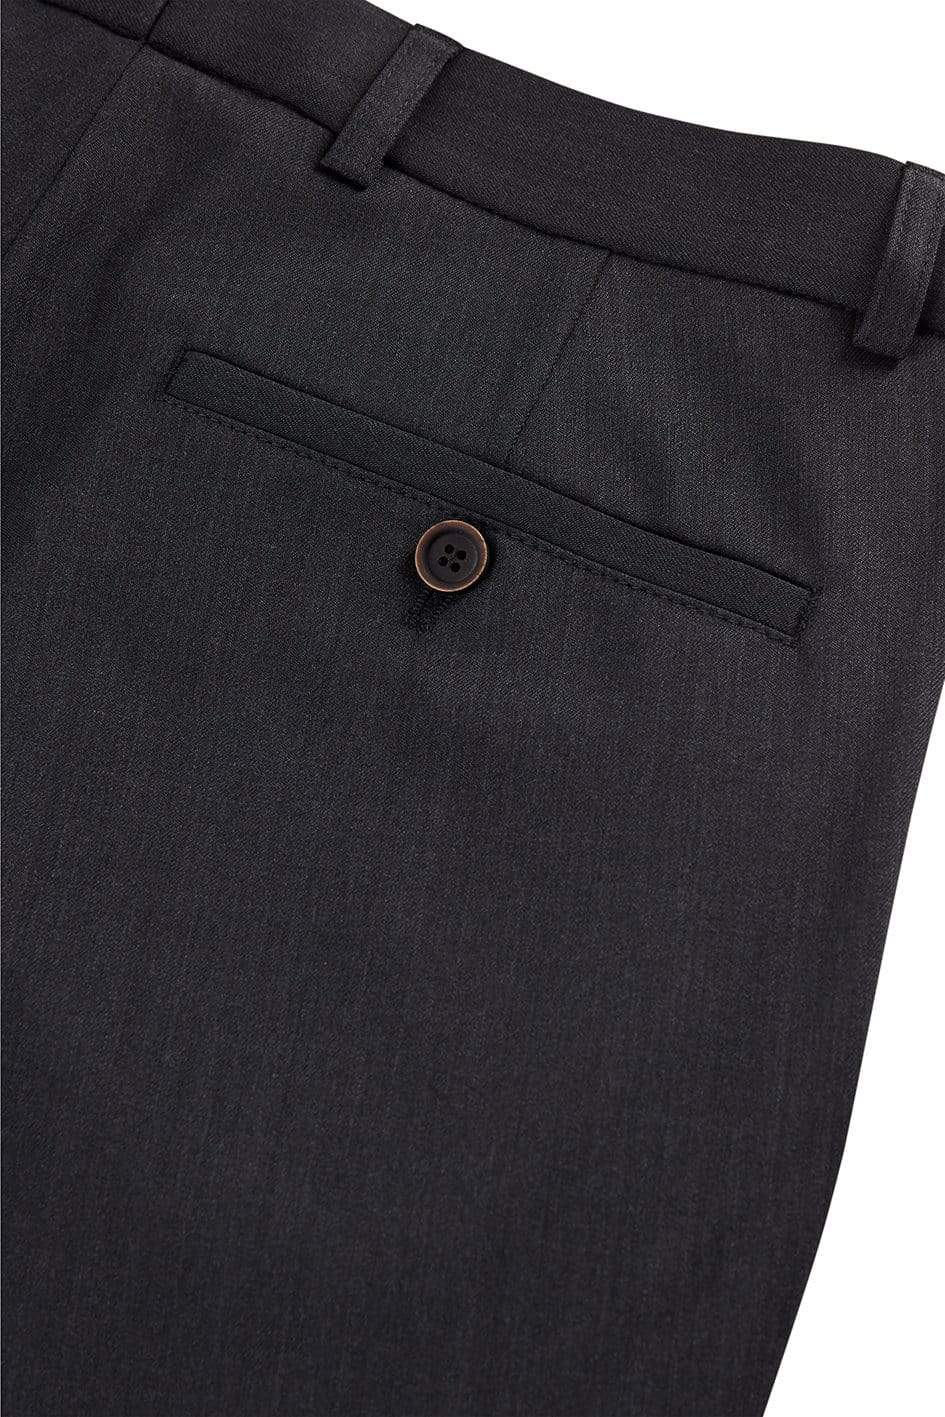 Sunwill Classic Traveller Trousers Available in 4 Colors and Size 34-44